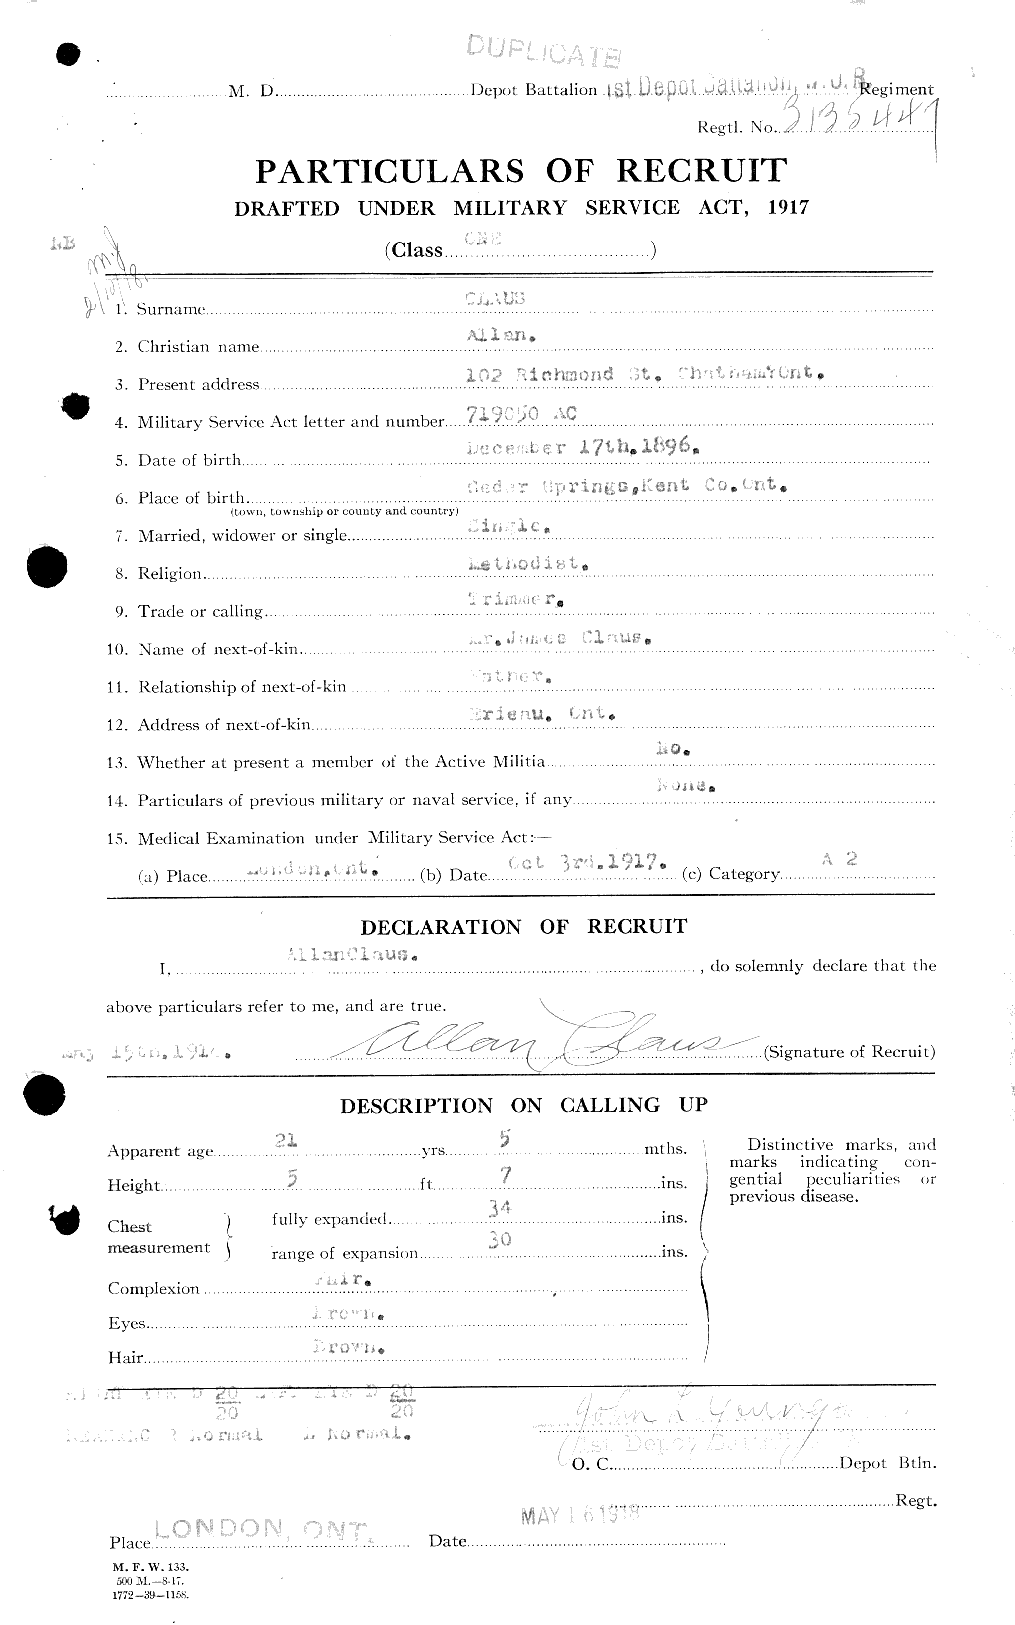 Personnel Records of the First World War - CEF 019055a